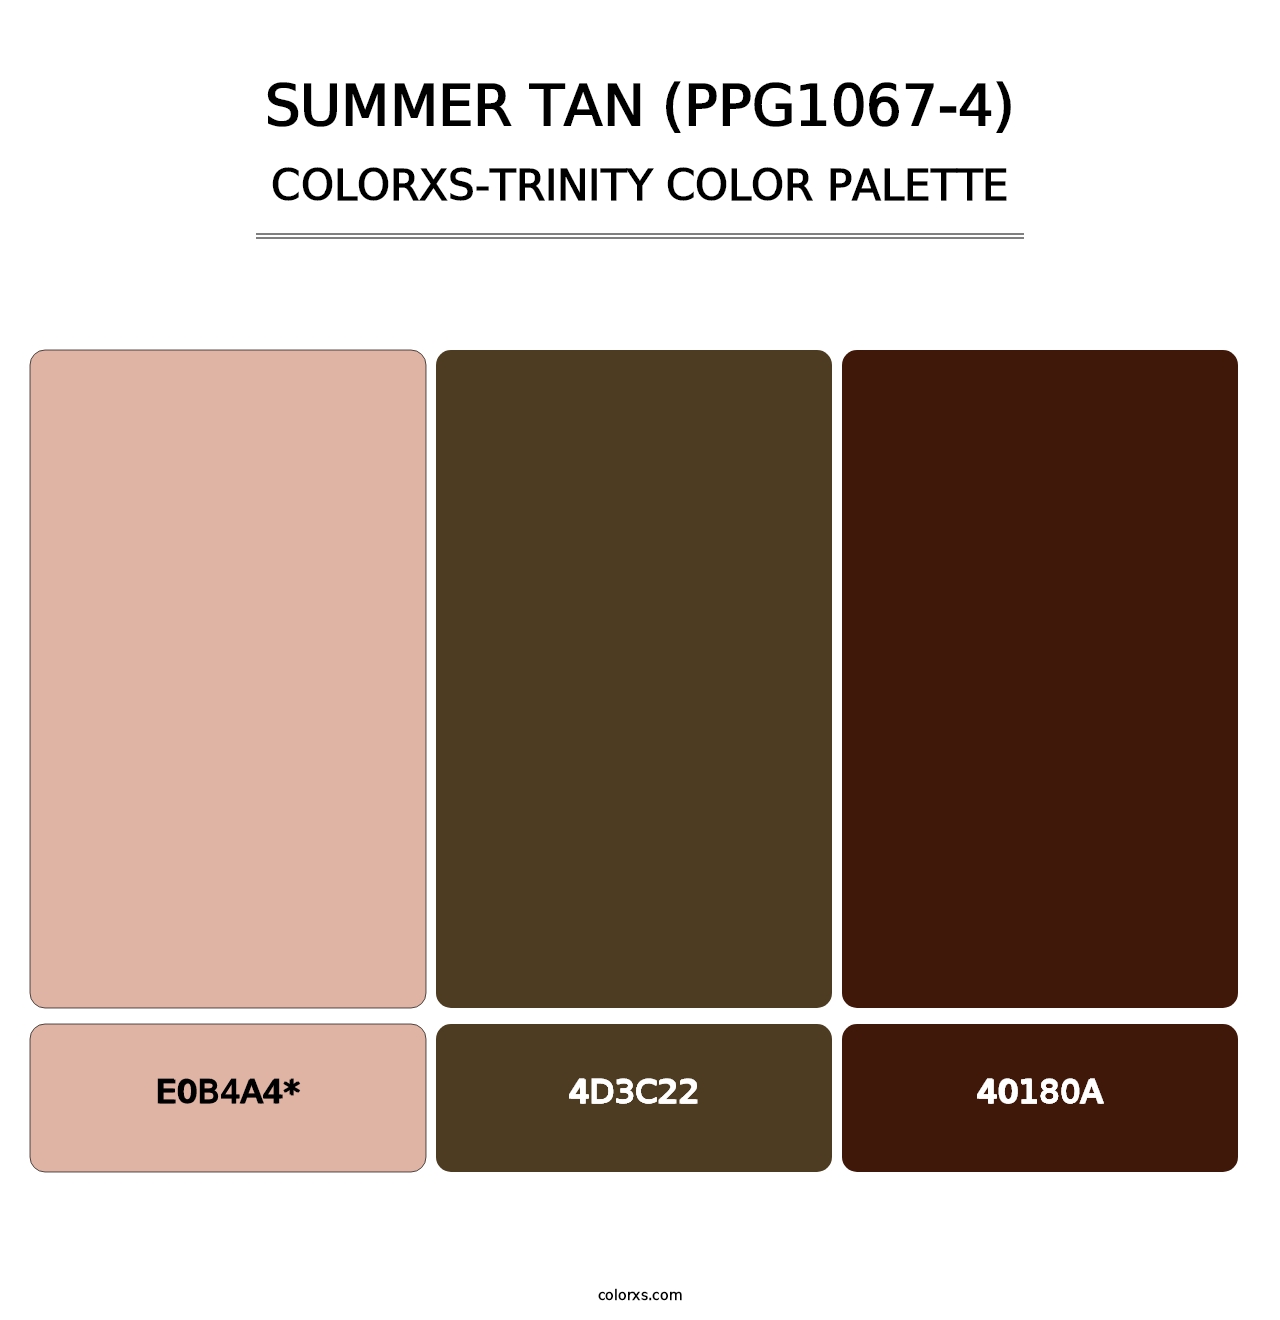 Summer Tan (PPG1067-4) - Colorxs Trinity Palette